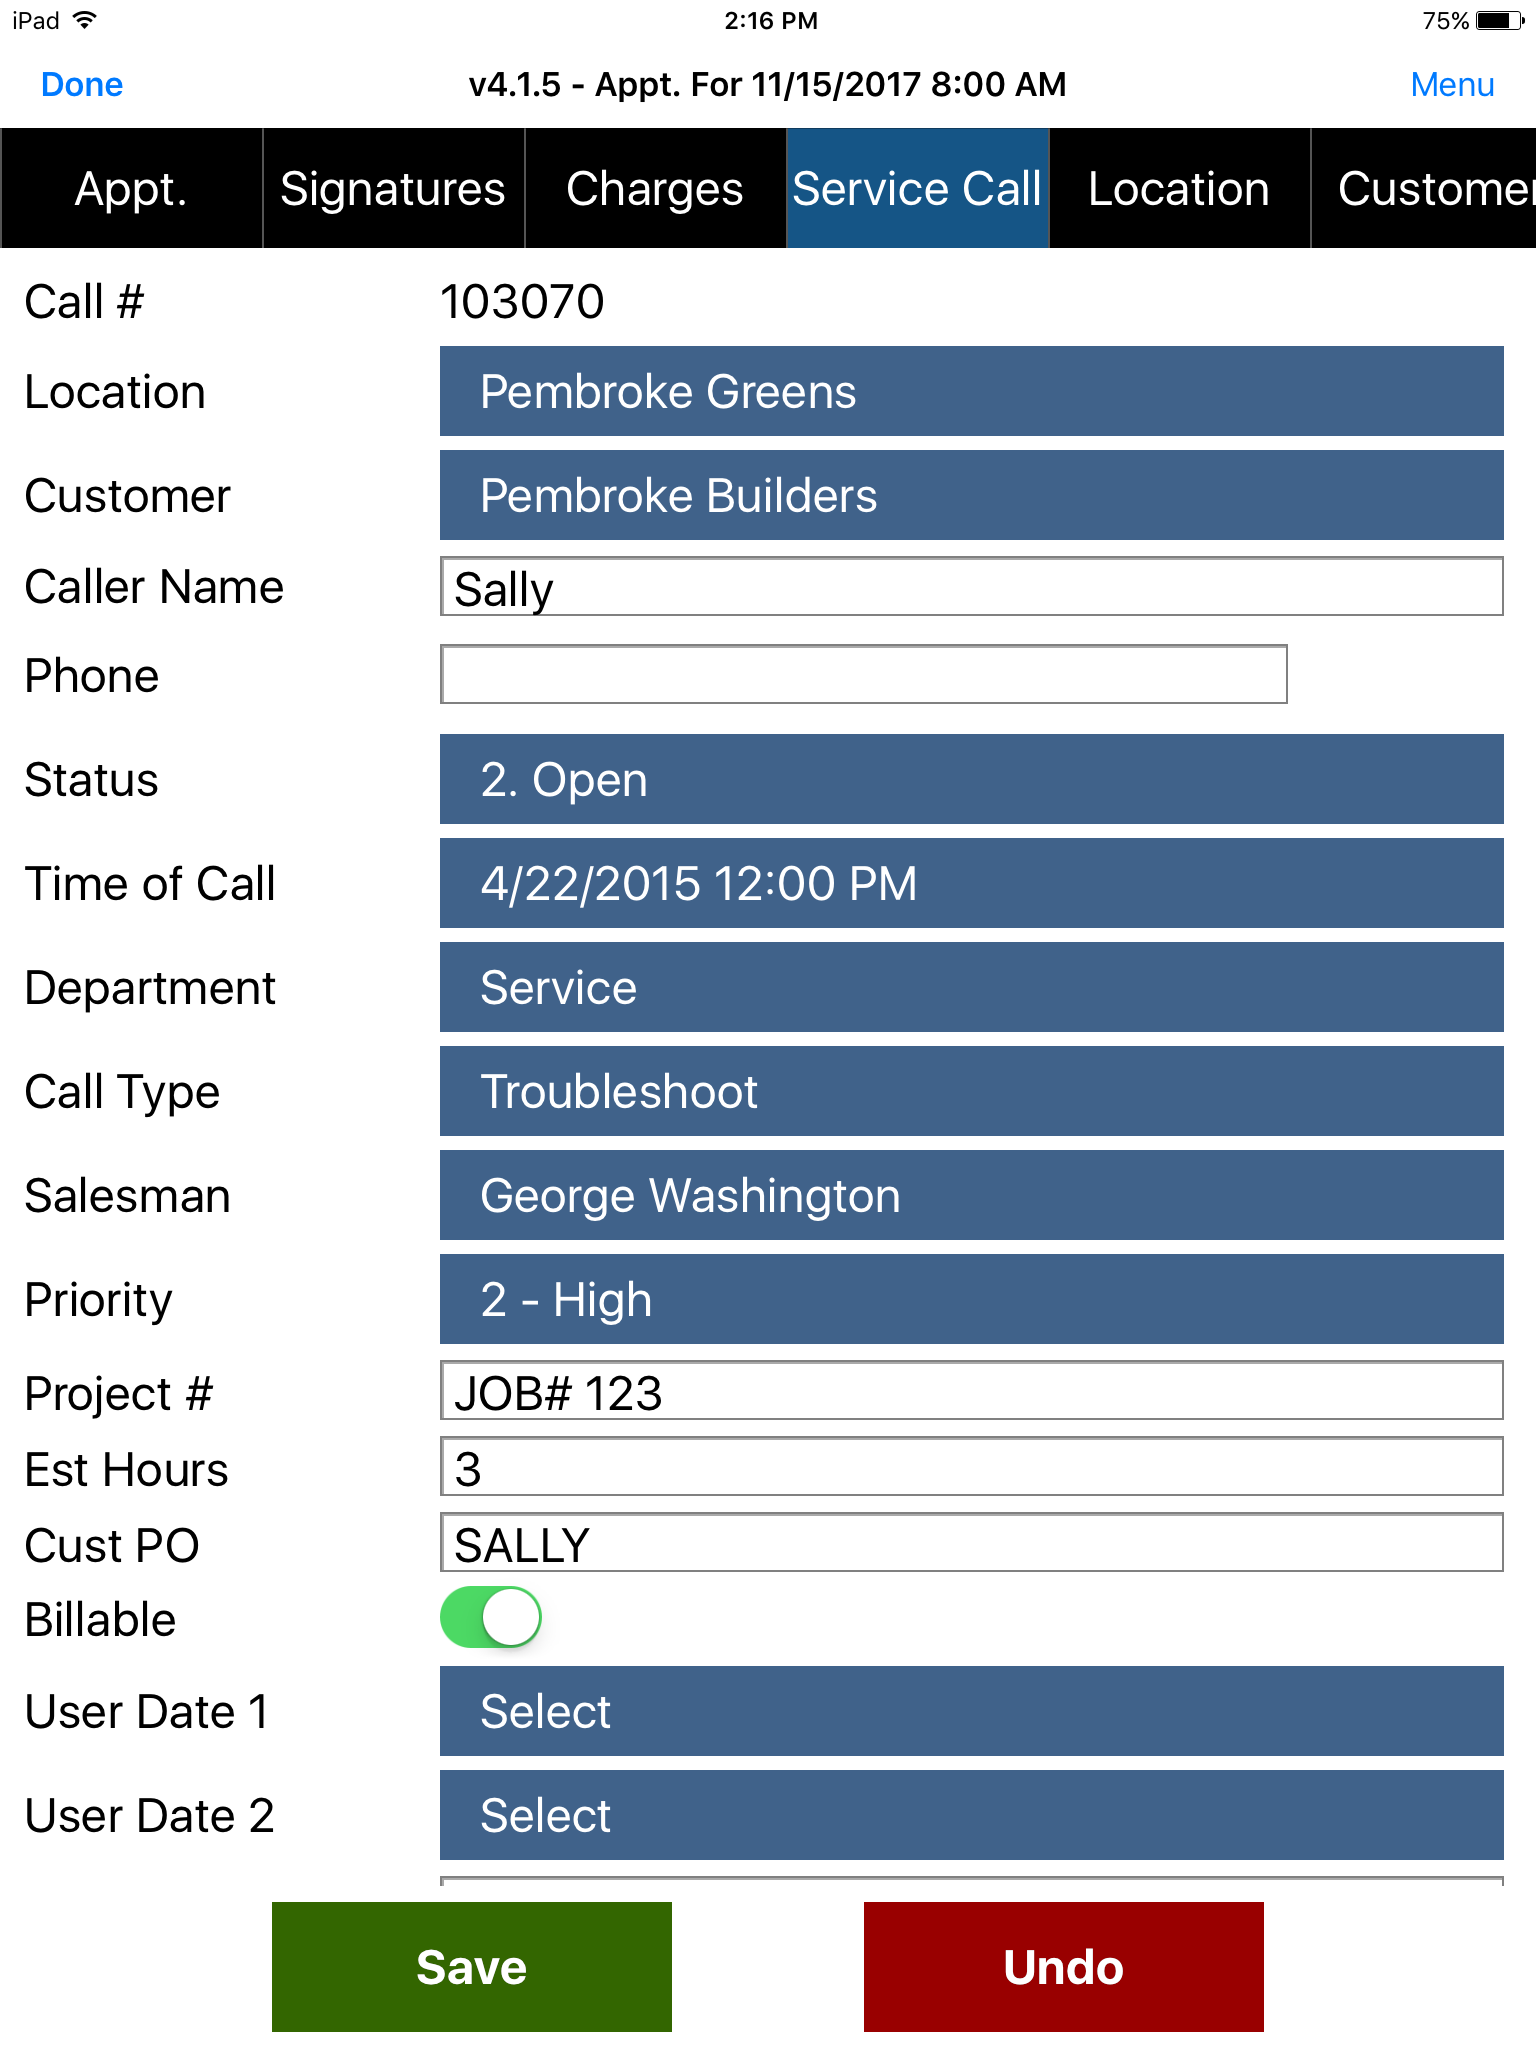 Appointment - Service Call tab